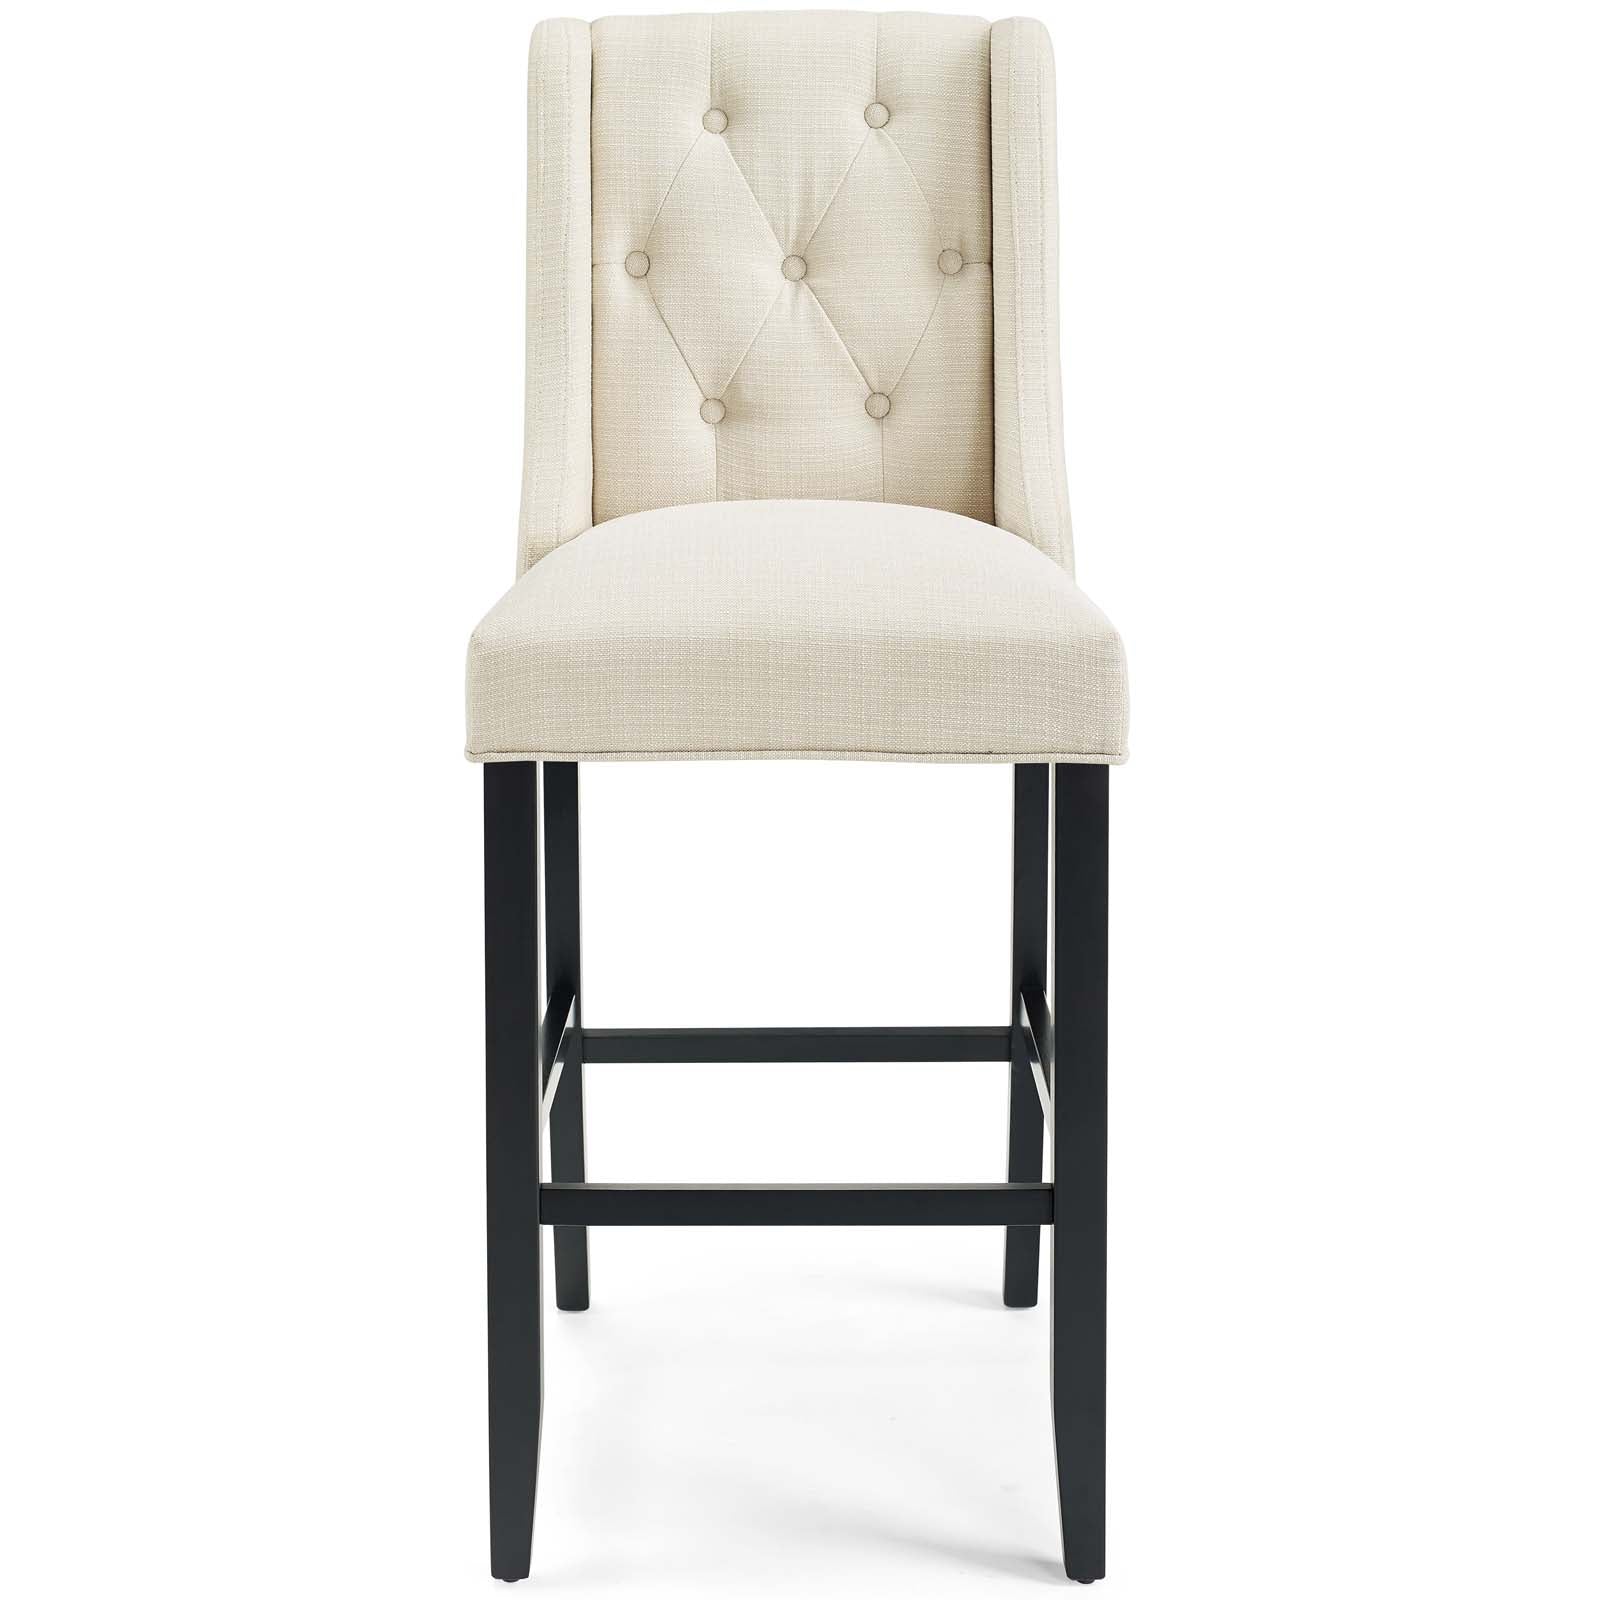 Modway Barstools - Baronet Tufted Button Upholstered Fabric Bar Stool Beige